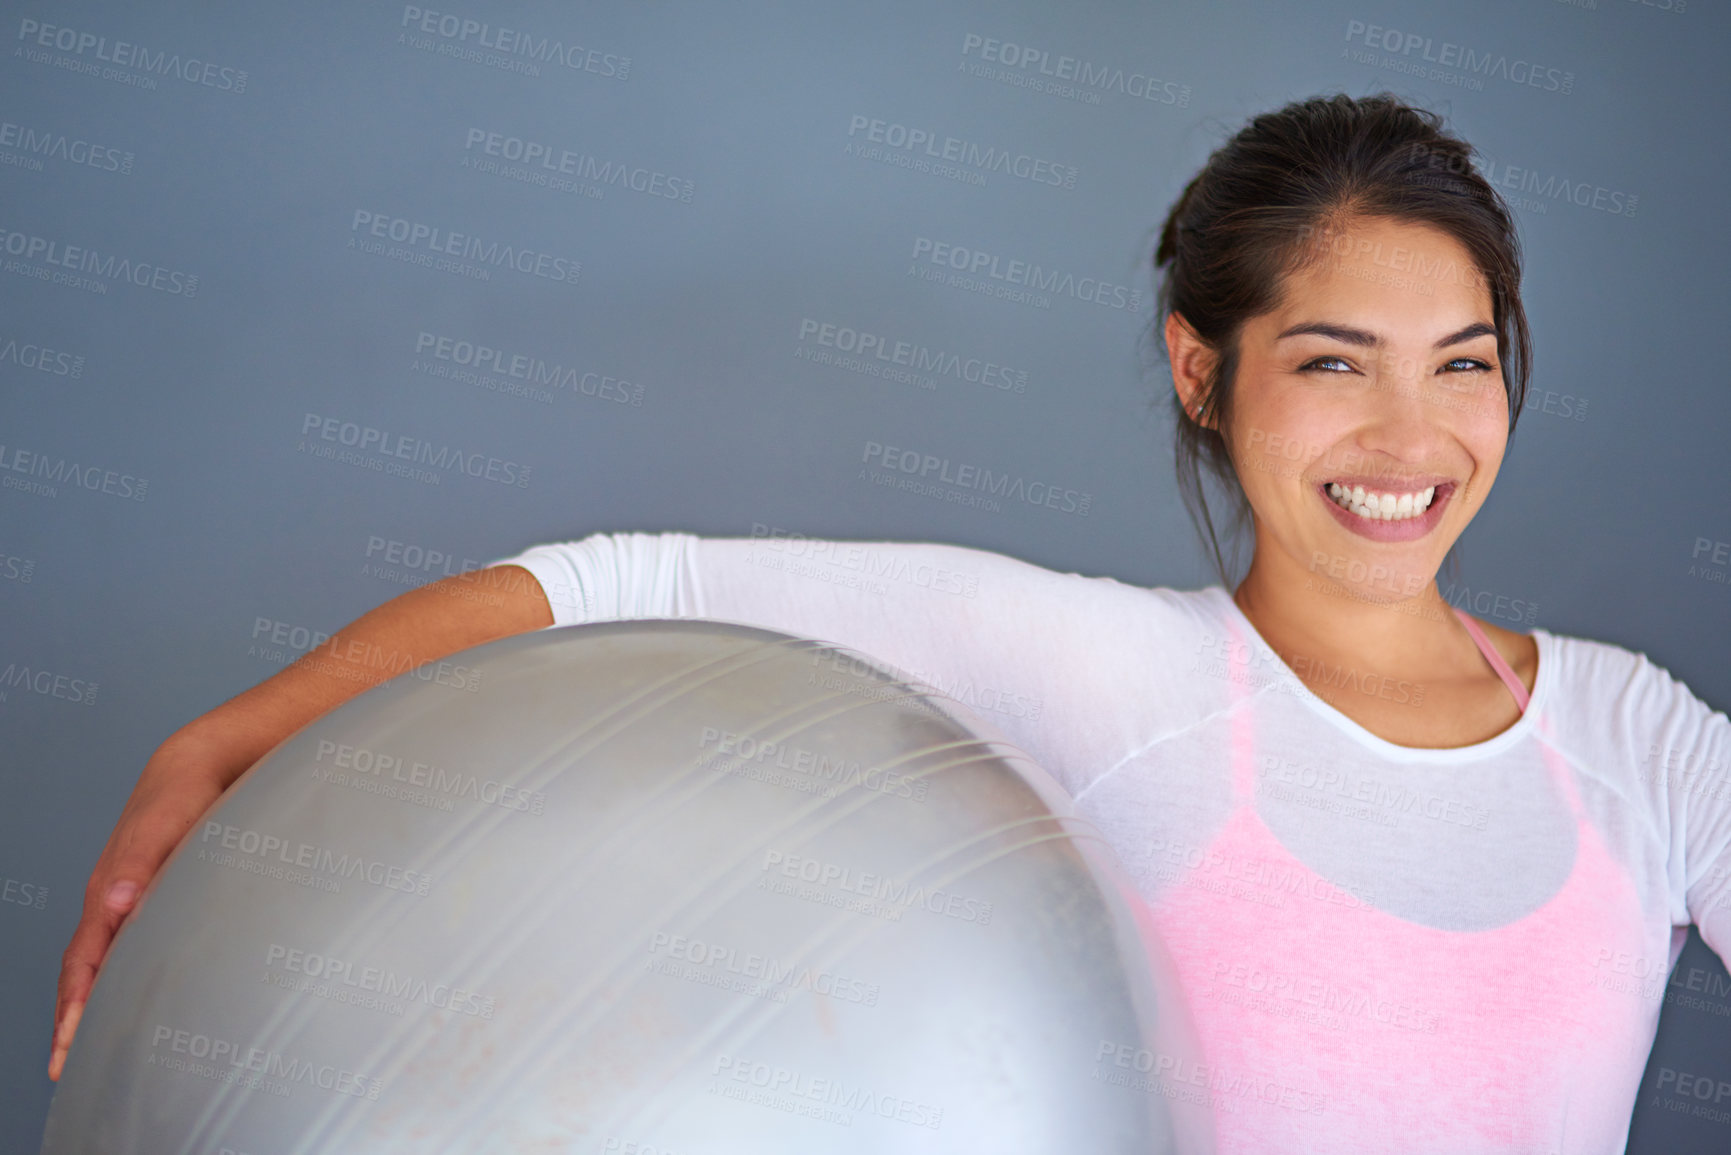 Buy stock photo Cropped shot of a sporty young woman holding a pilates ball against a grey background